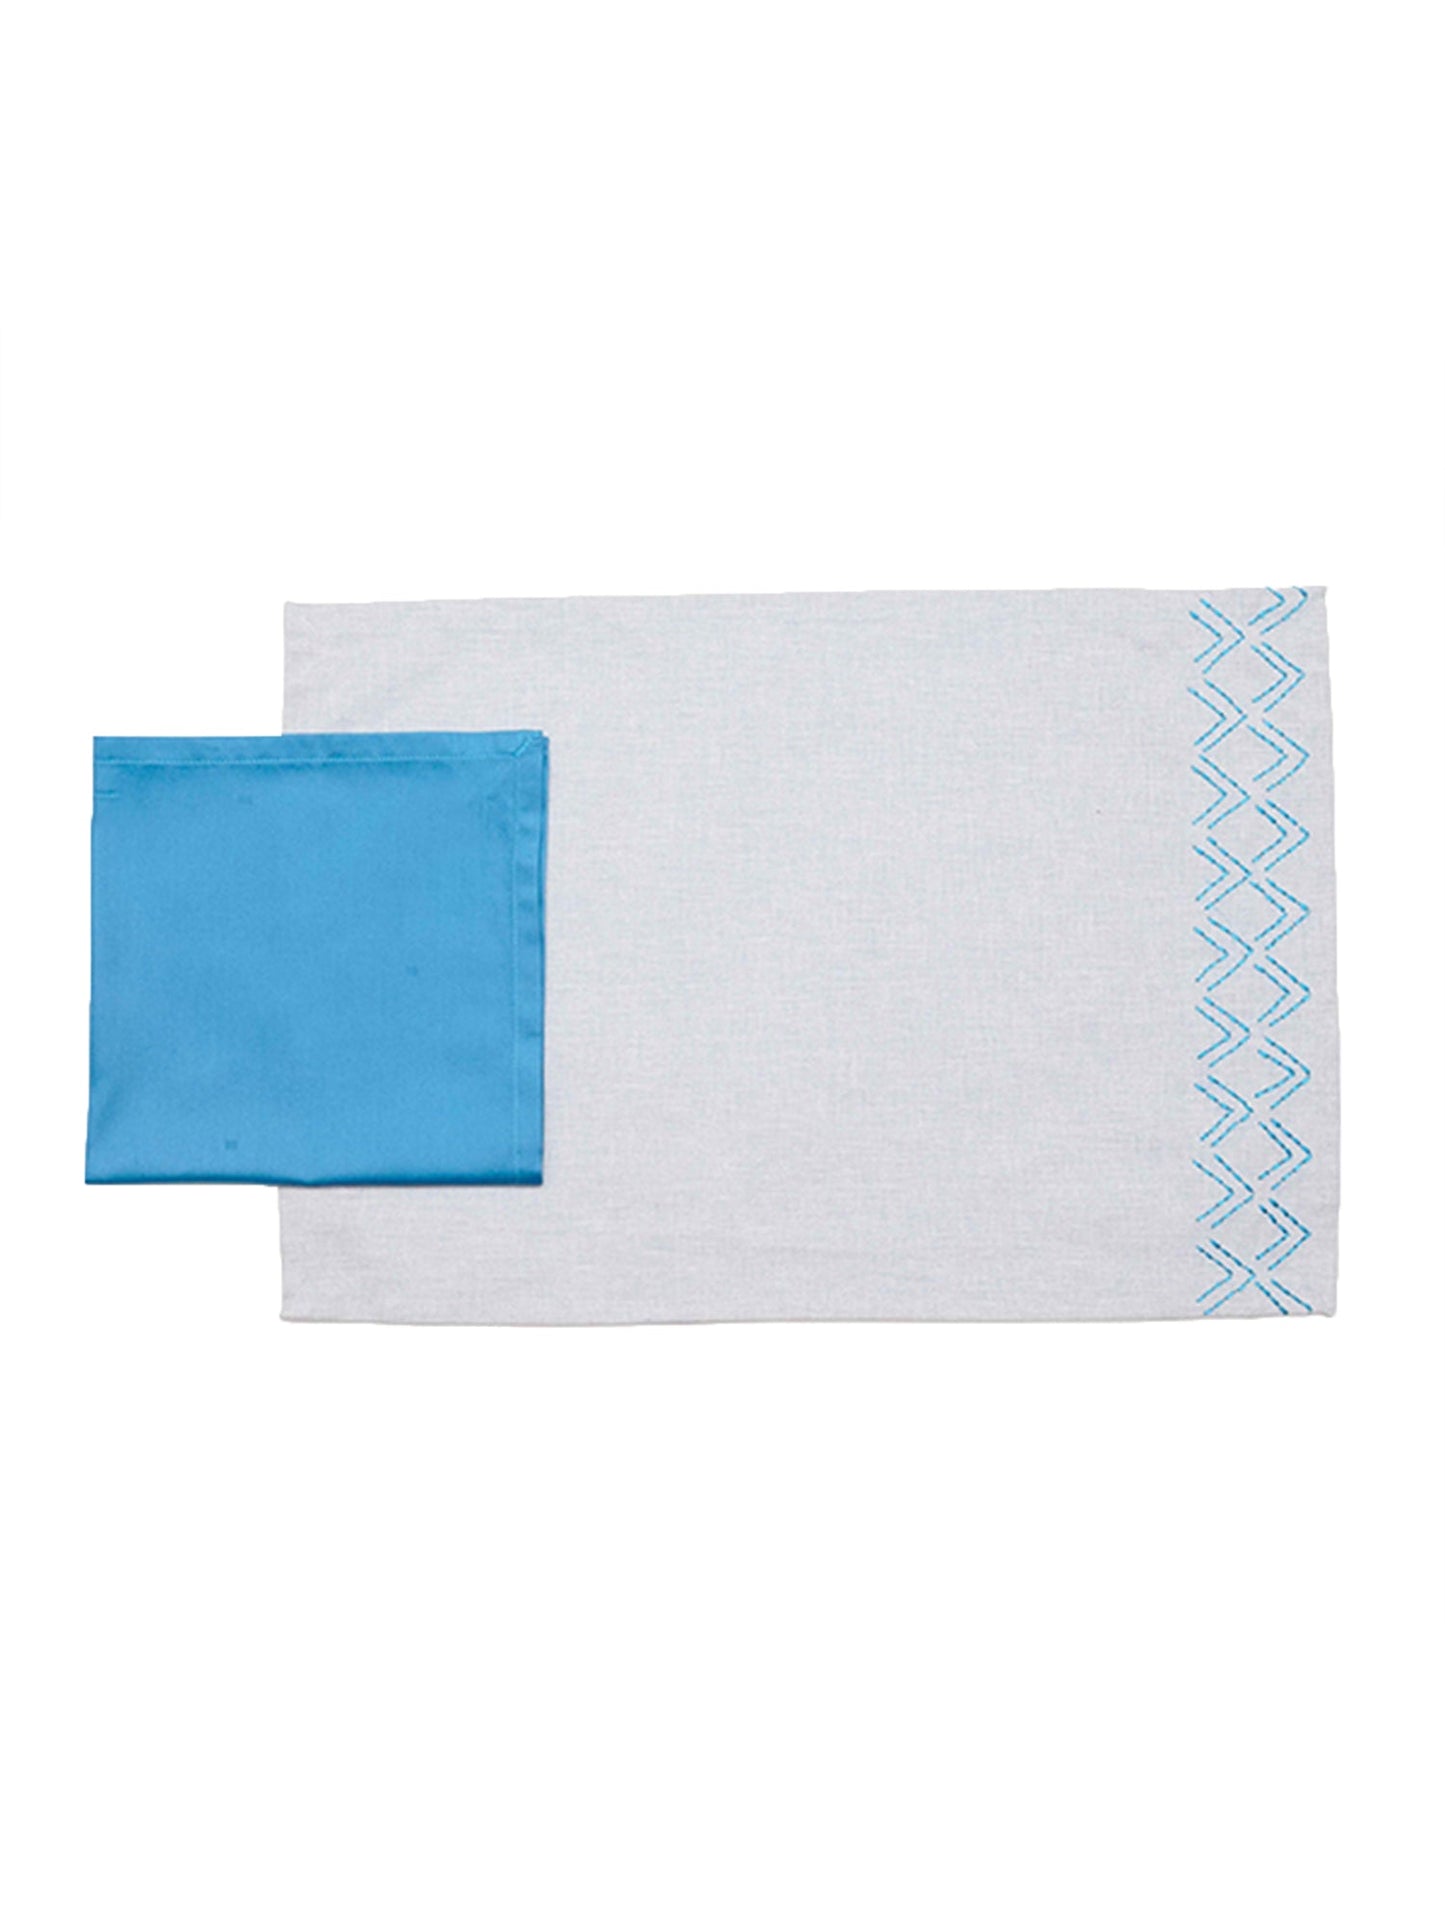 Table Mats and Napkins 100% Cotton Embroidered Light Blue and Aqua - 13" x 19" ; 16" x 16" - Set of 6